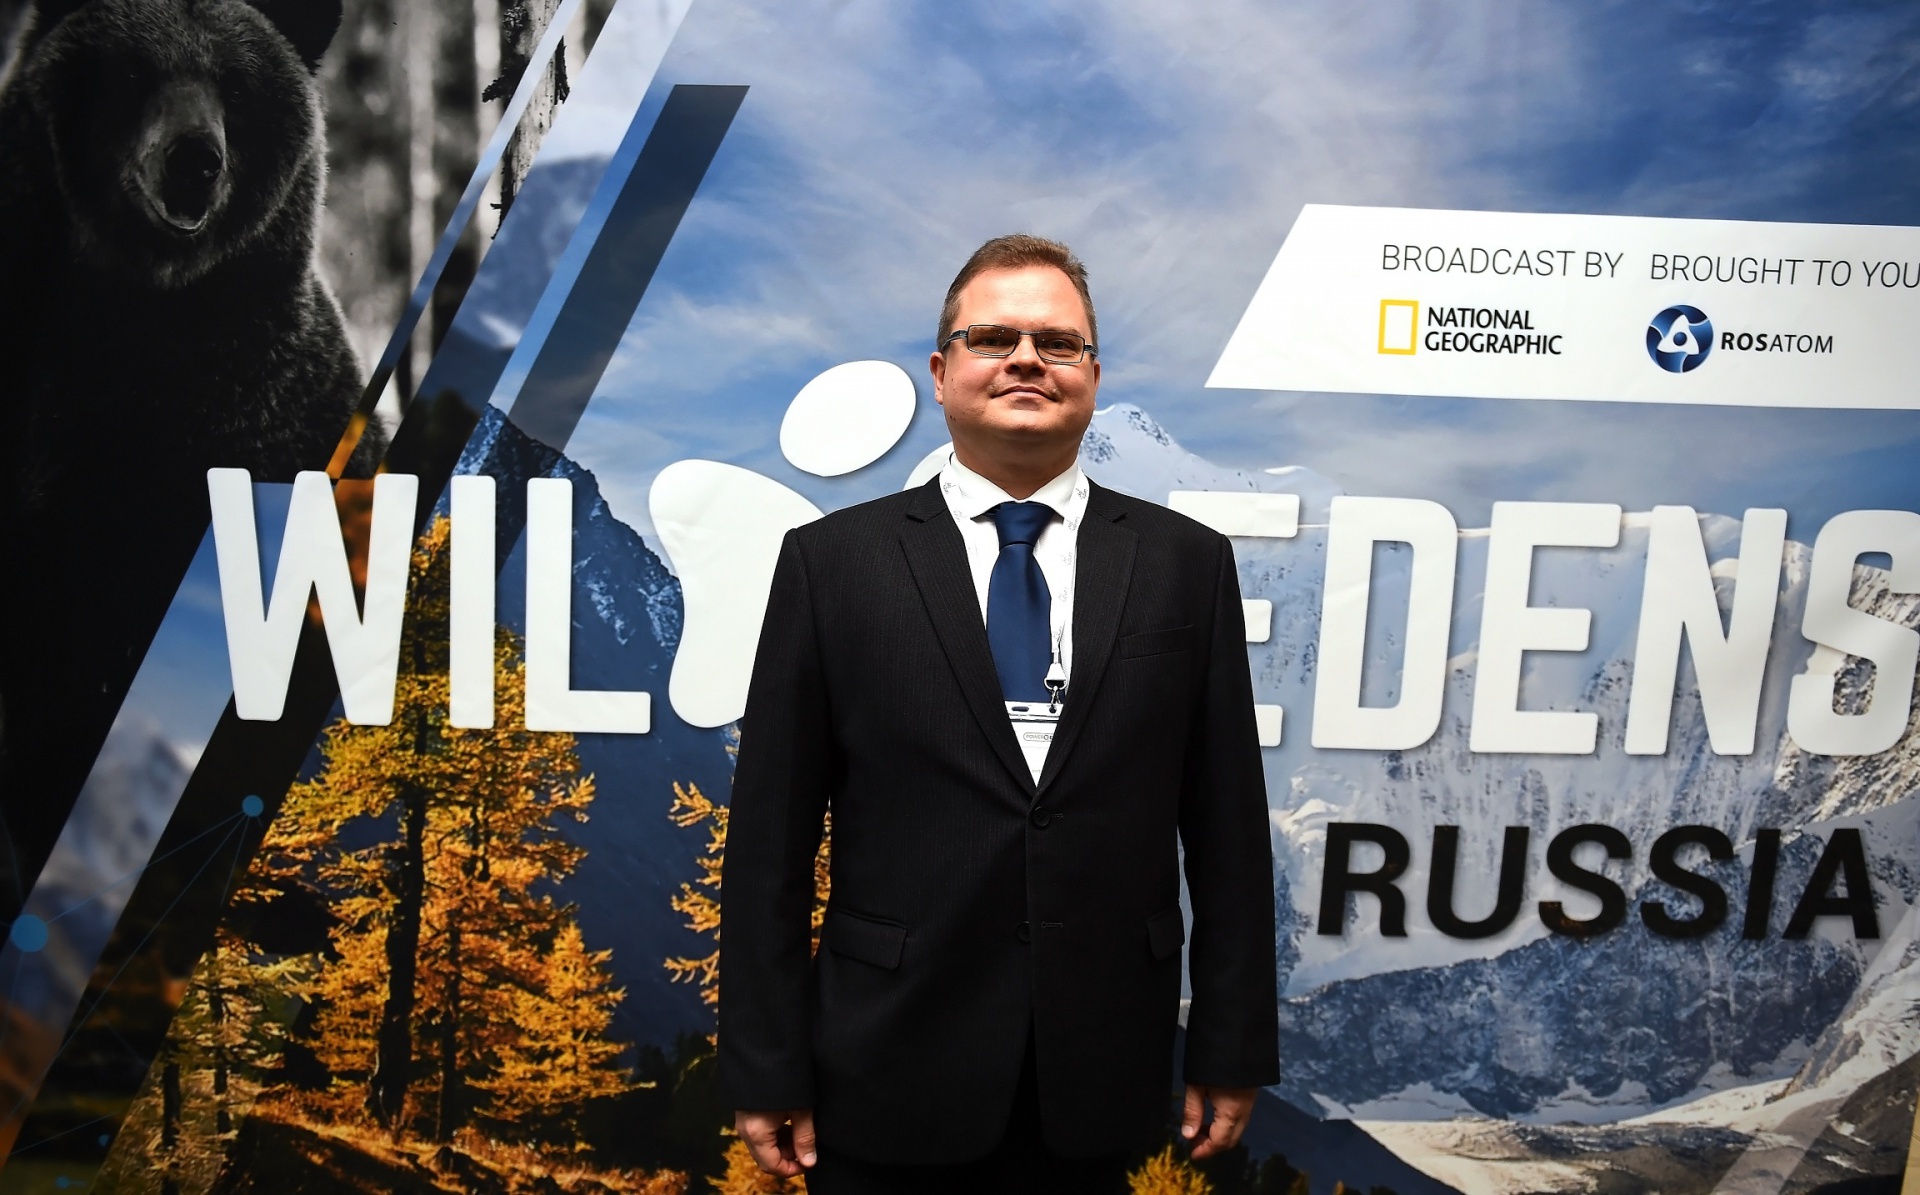 CEO of Rosatom Central and Southern Africa Dmitry Shornikov at Wild Edens screening